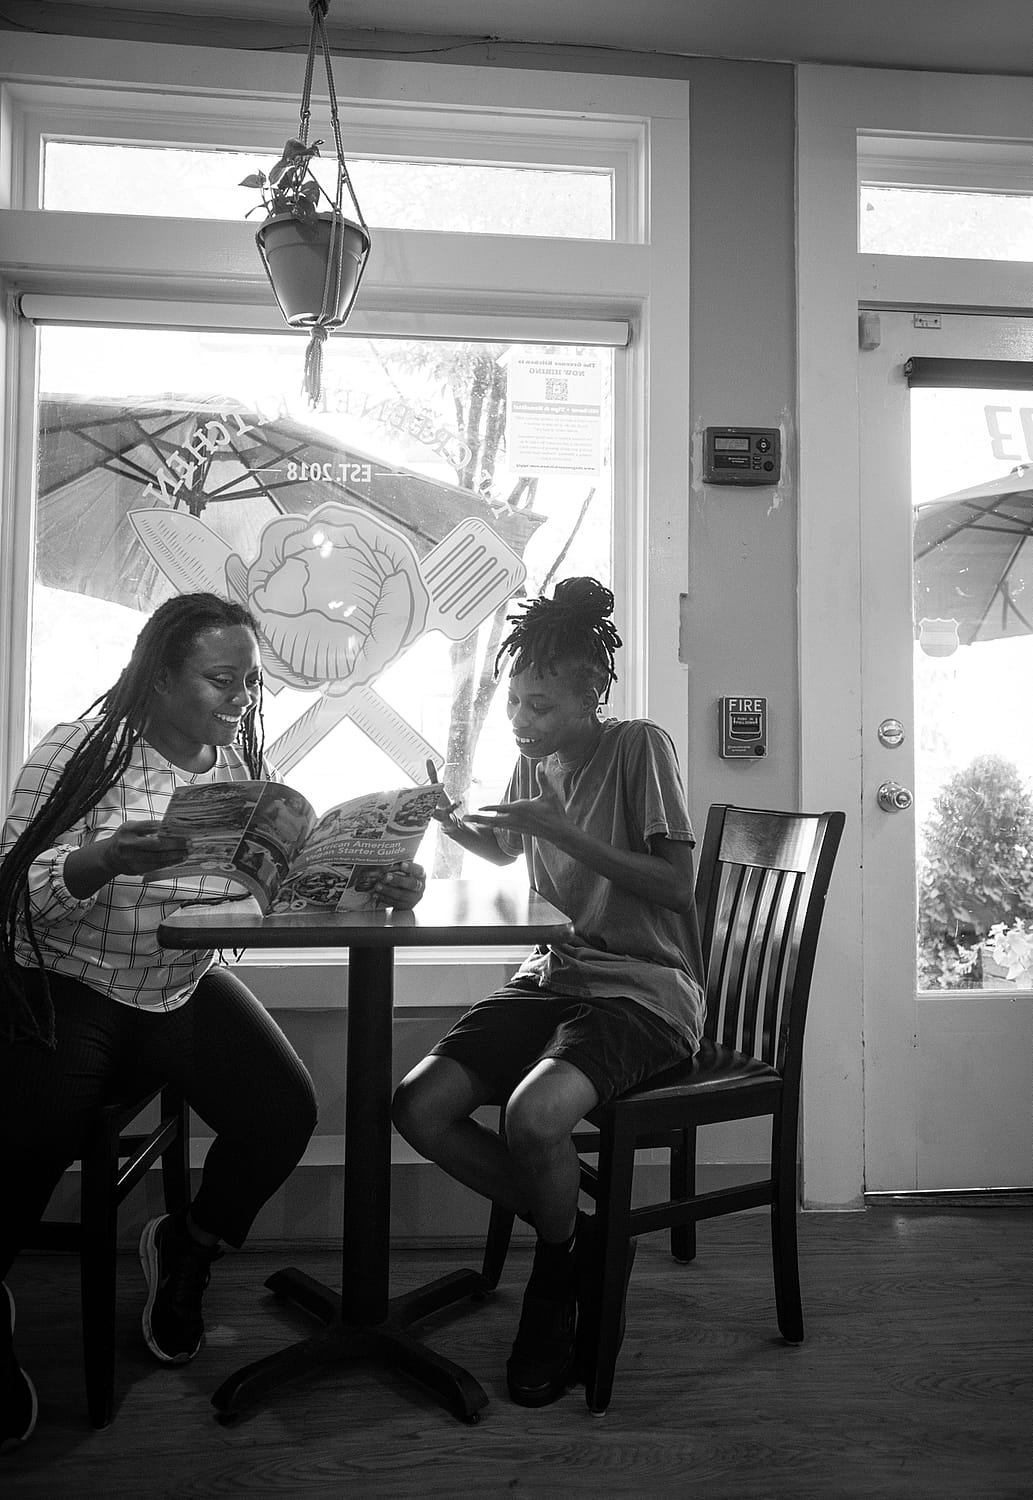 Vegan advocate, humanitarian, and entrepreneur Brenda Sanders looks at the veg guide with a friend at her restaurant in Baltimore, The Greener Kitchen. Photo by: Jo-Anne McArthur / #UnboundProject / We Animals Media.